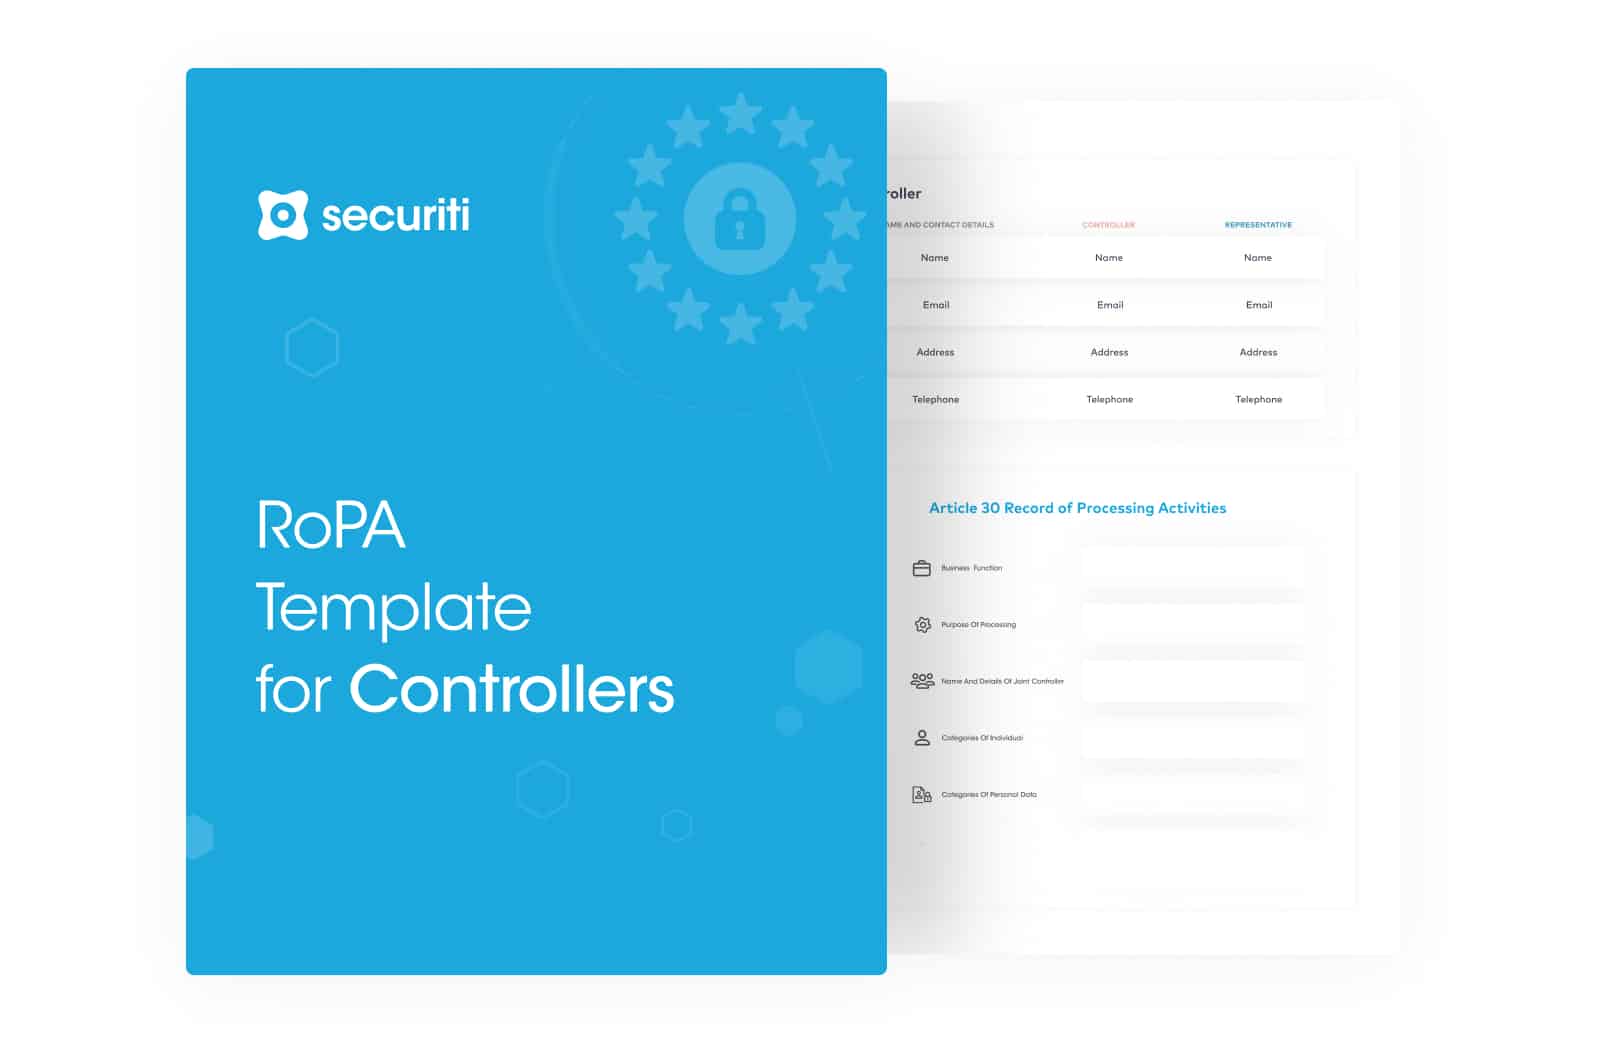 RoPA Template for Controllers